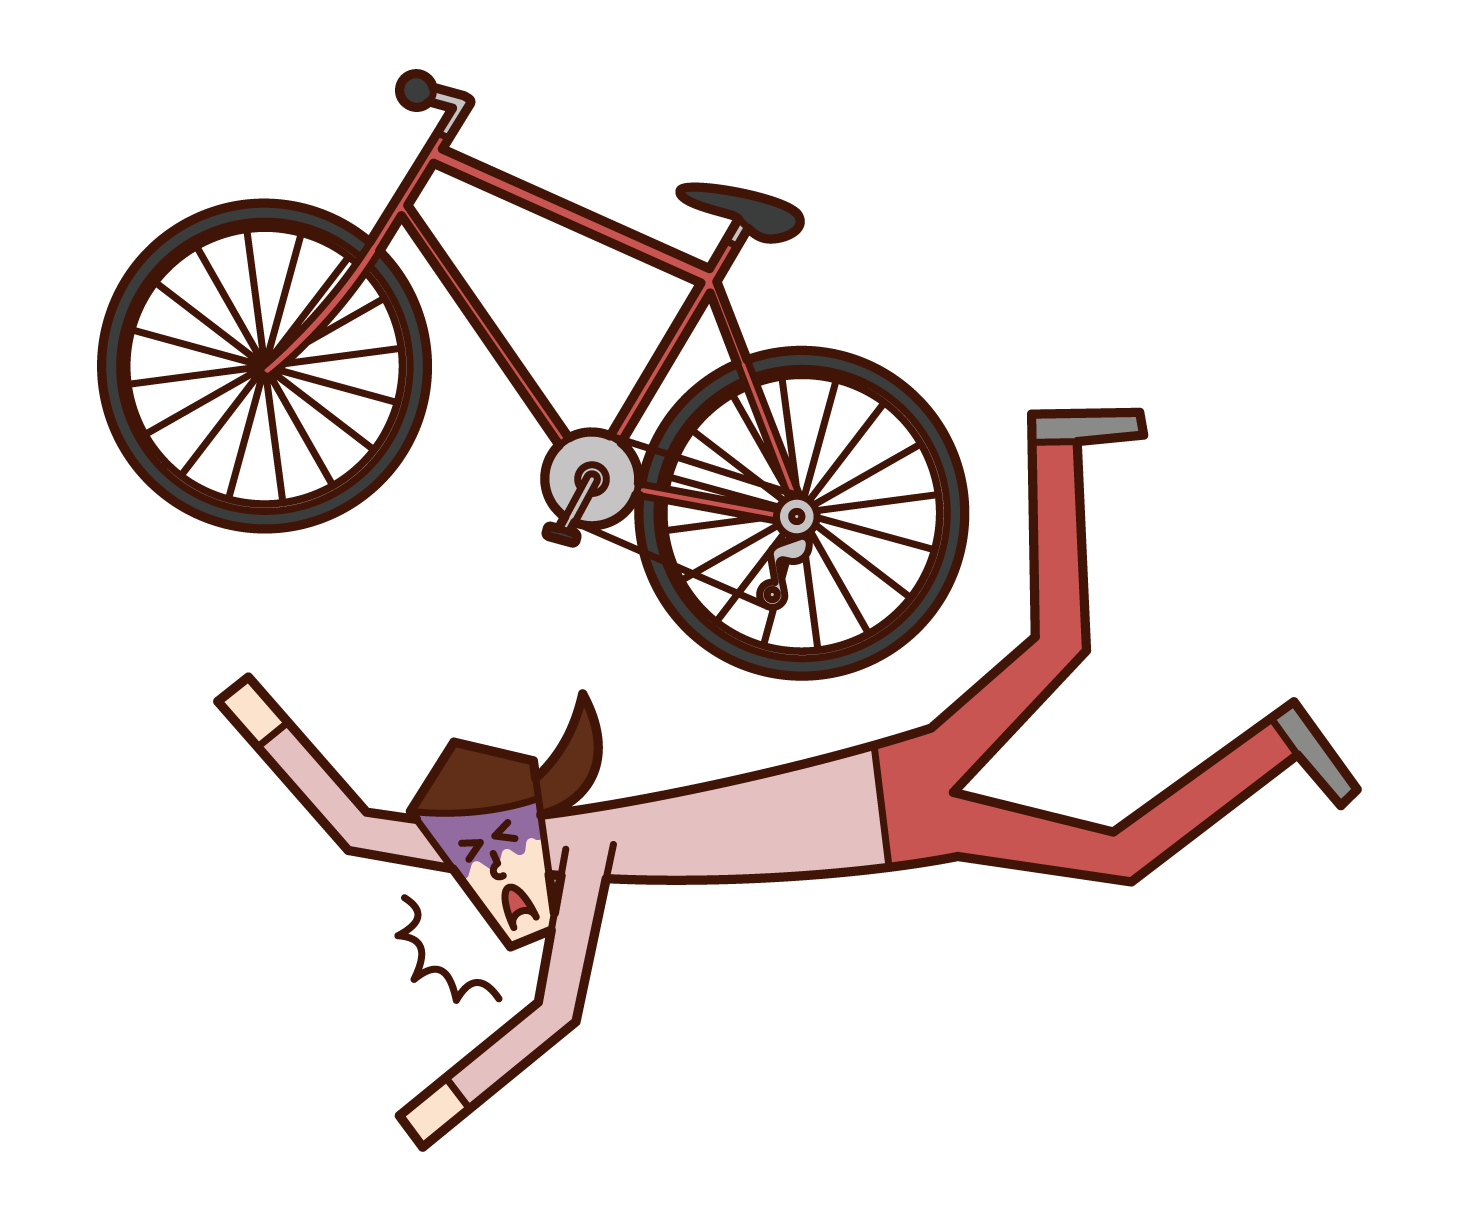 Illustration of a woman falling over on a bicycle